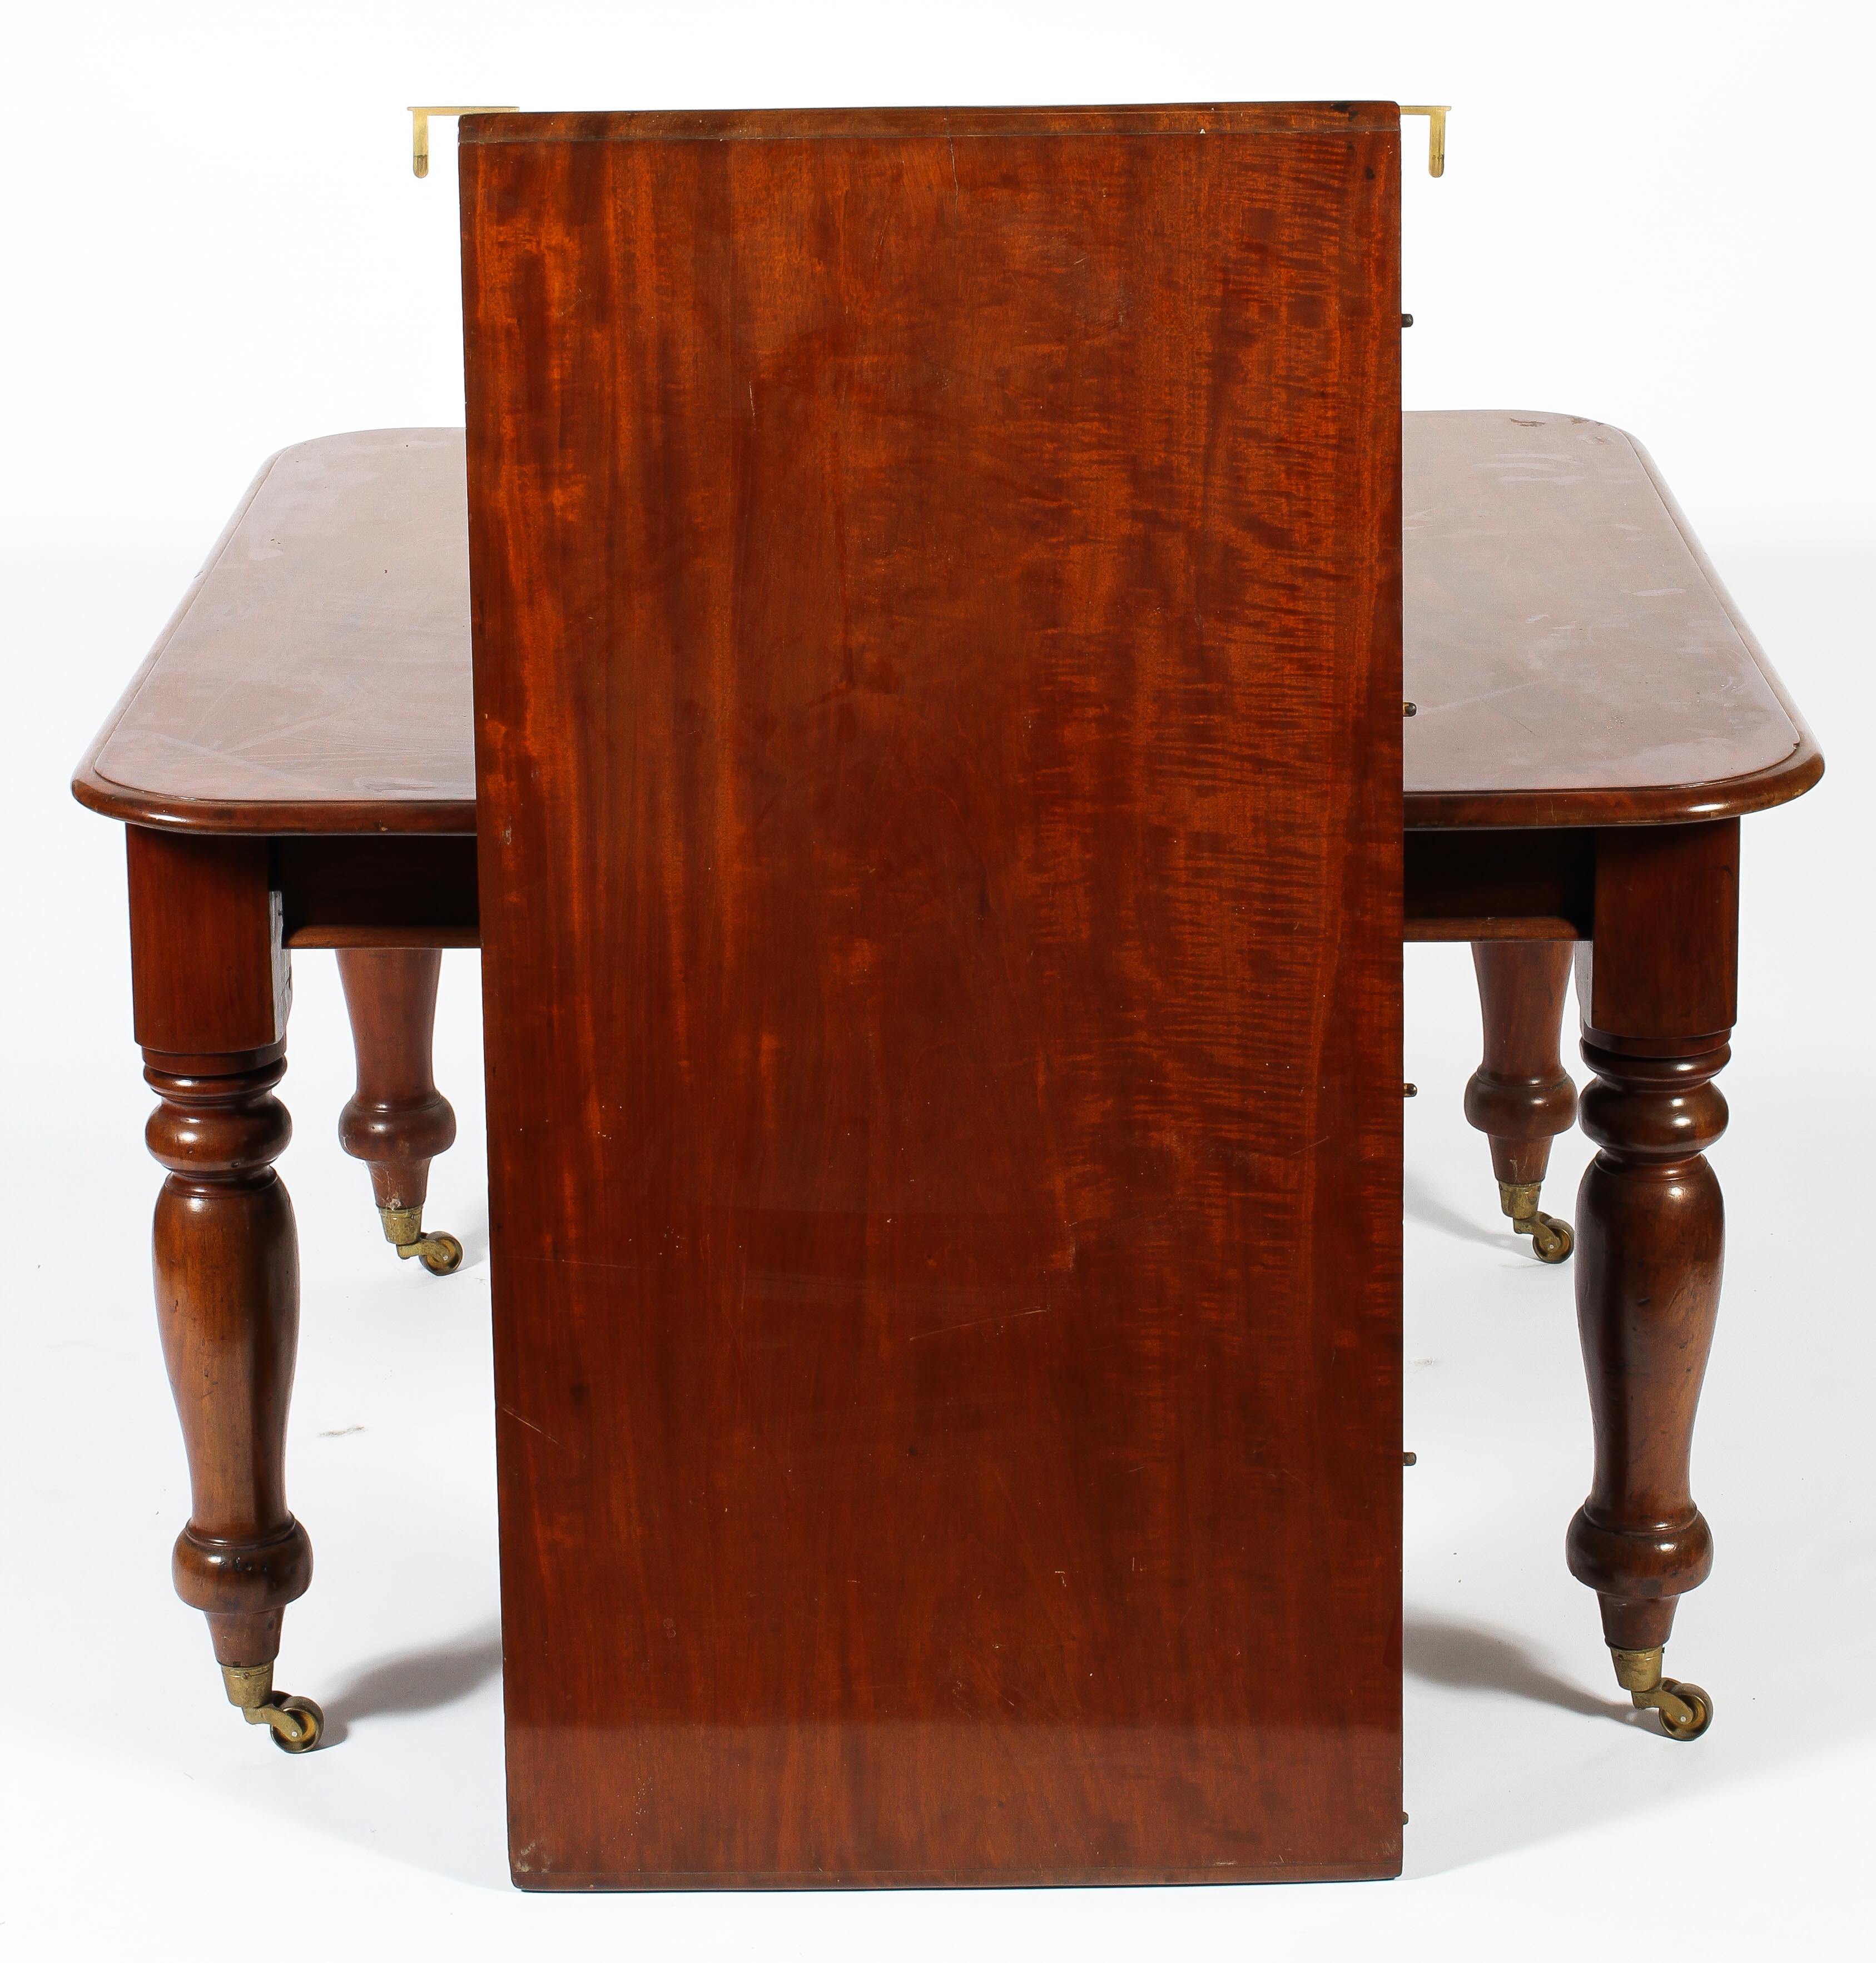 A Victorian mahogany extending dining table, with one additonal leaf, - Image 3 of 3